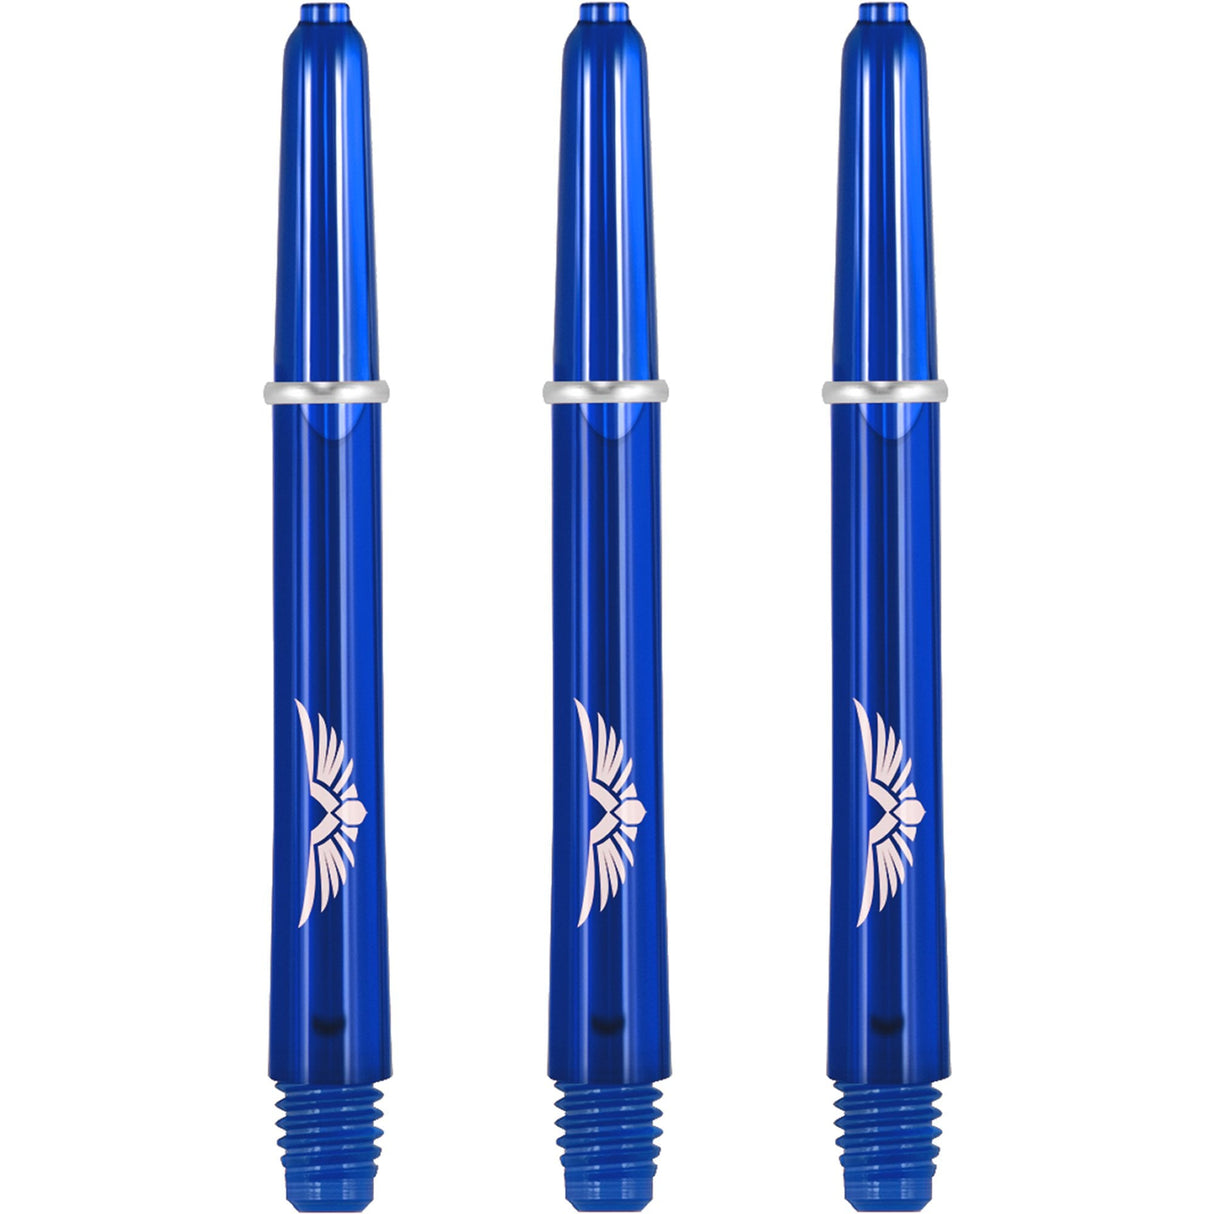 Shot Eagle Claw Dart Shafts - with Machined Rings - Strong Polycarbonate Stems - Blue Medium